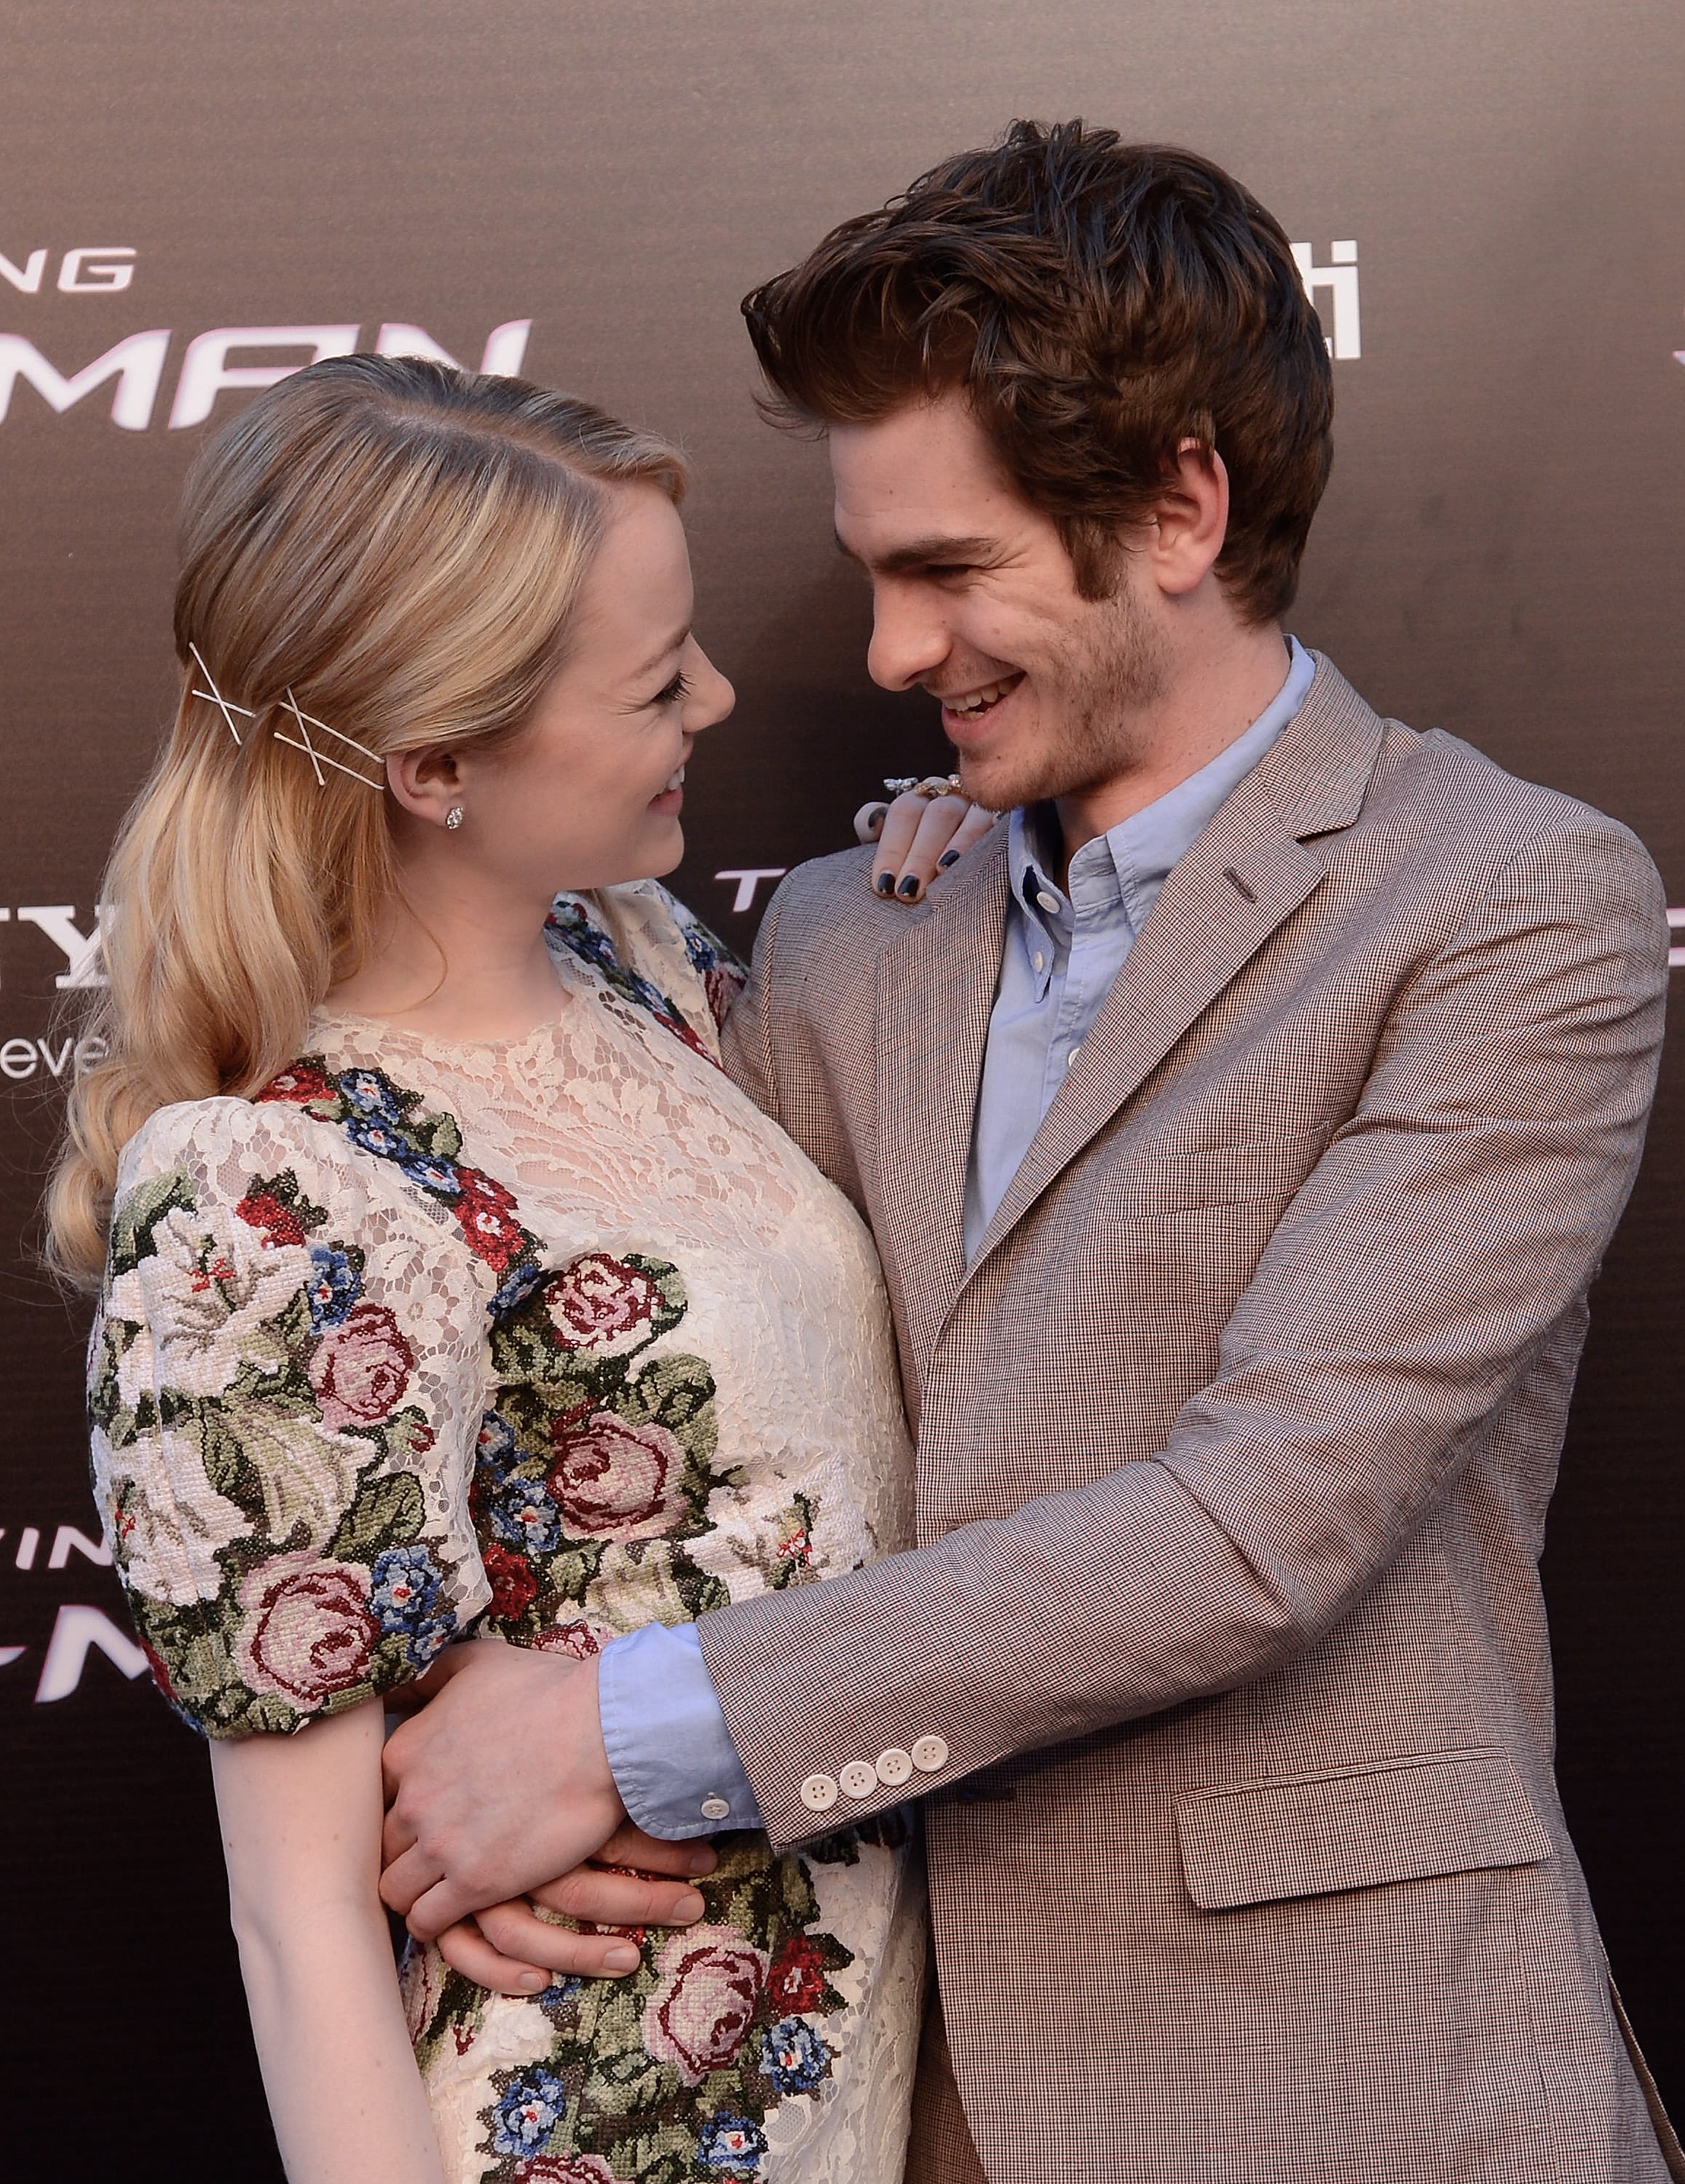 The Truth About Emma Stone's Marriage